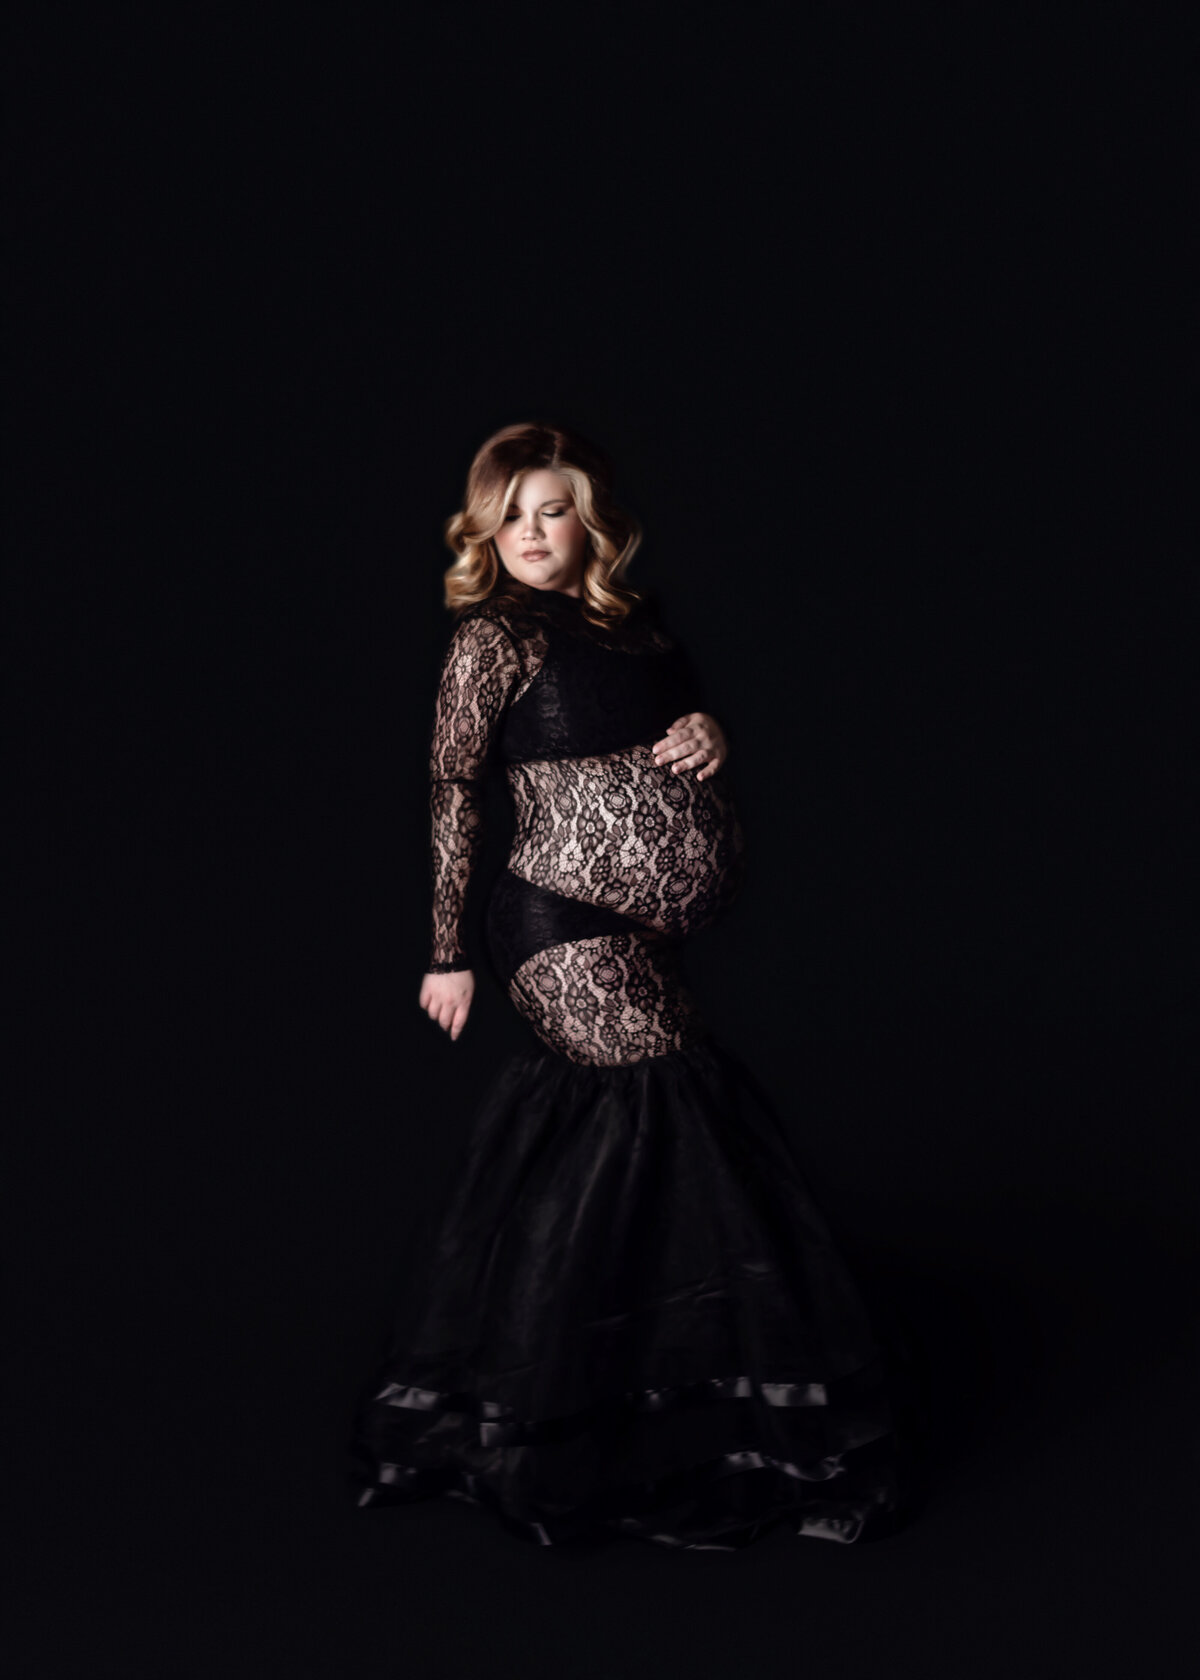 Women wearing black maternity gown with glam makeup during maternity photoshoot in Franklin Tennessee photography studio